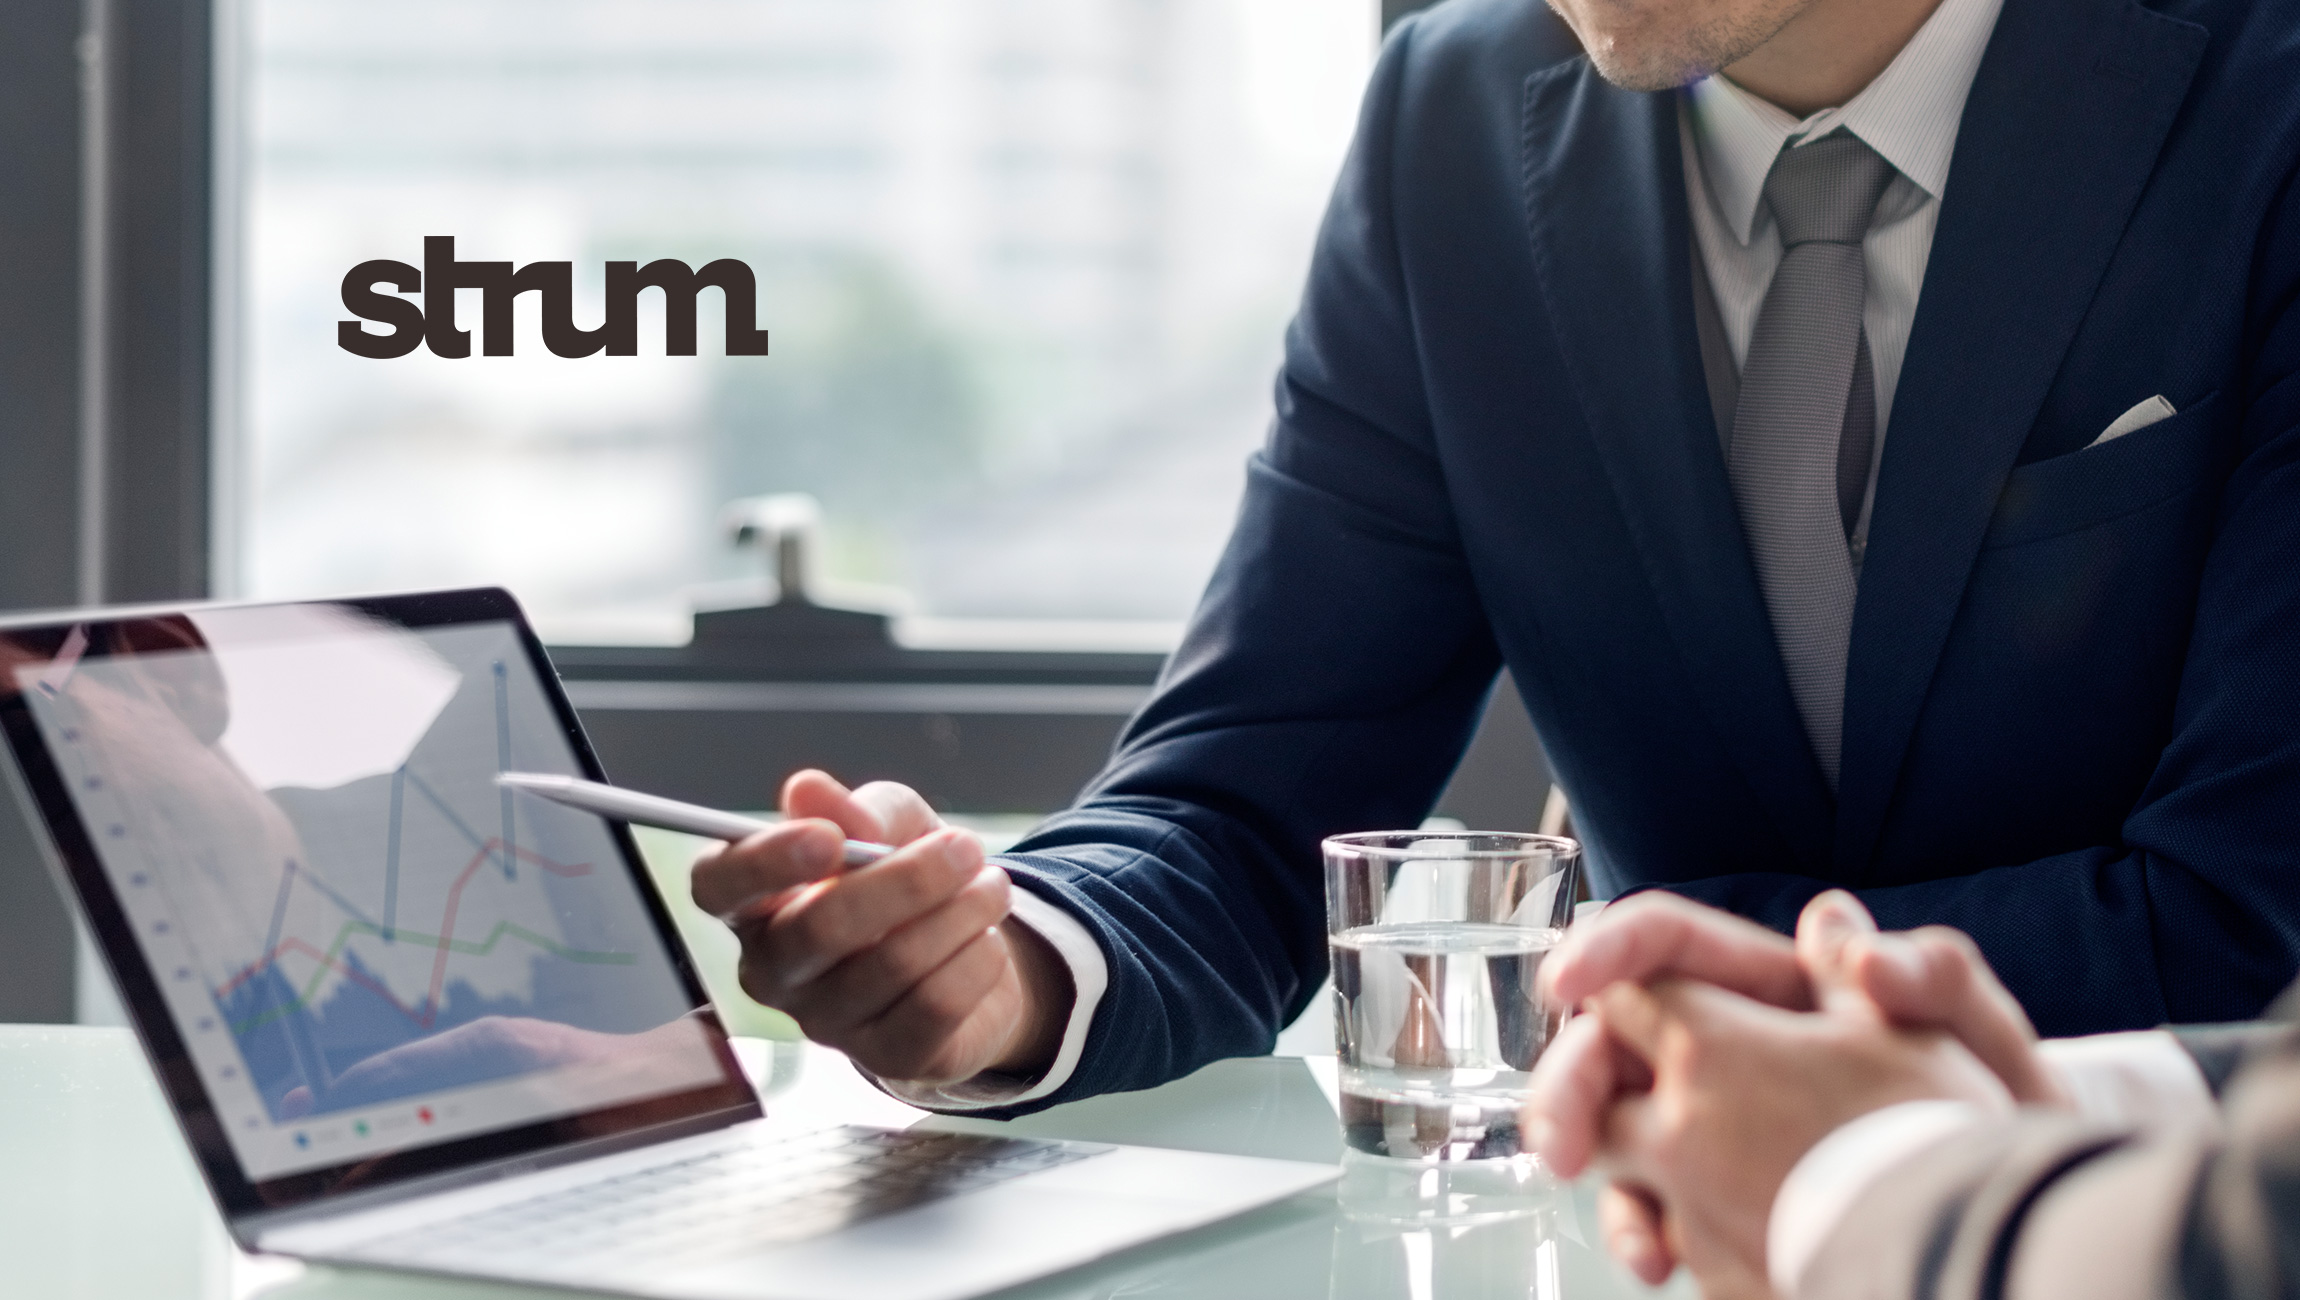 Strum Platform Launches as New Business Intelligence Data Analytics Software Designed for User Personalization, Targeting and ROI Performance